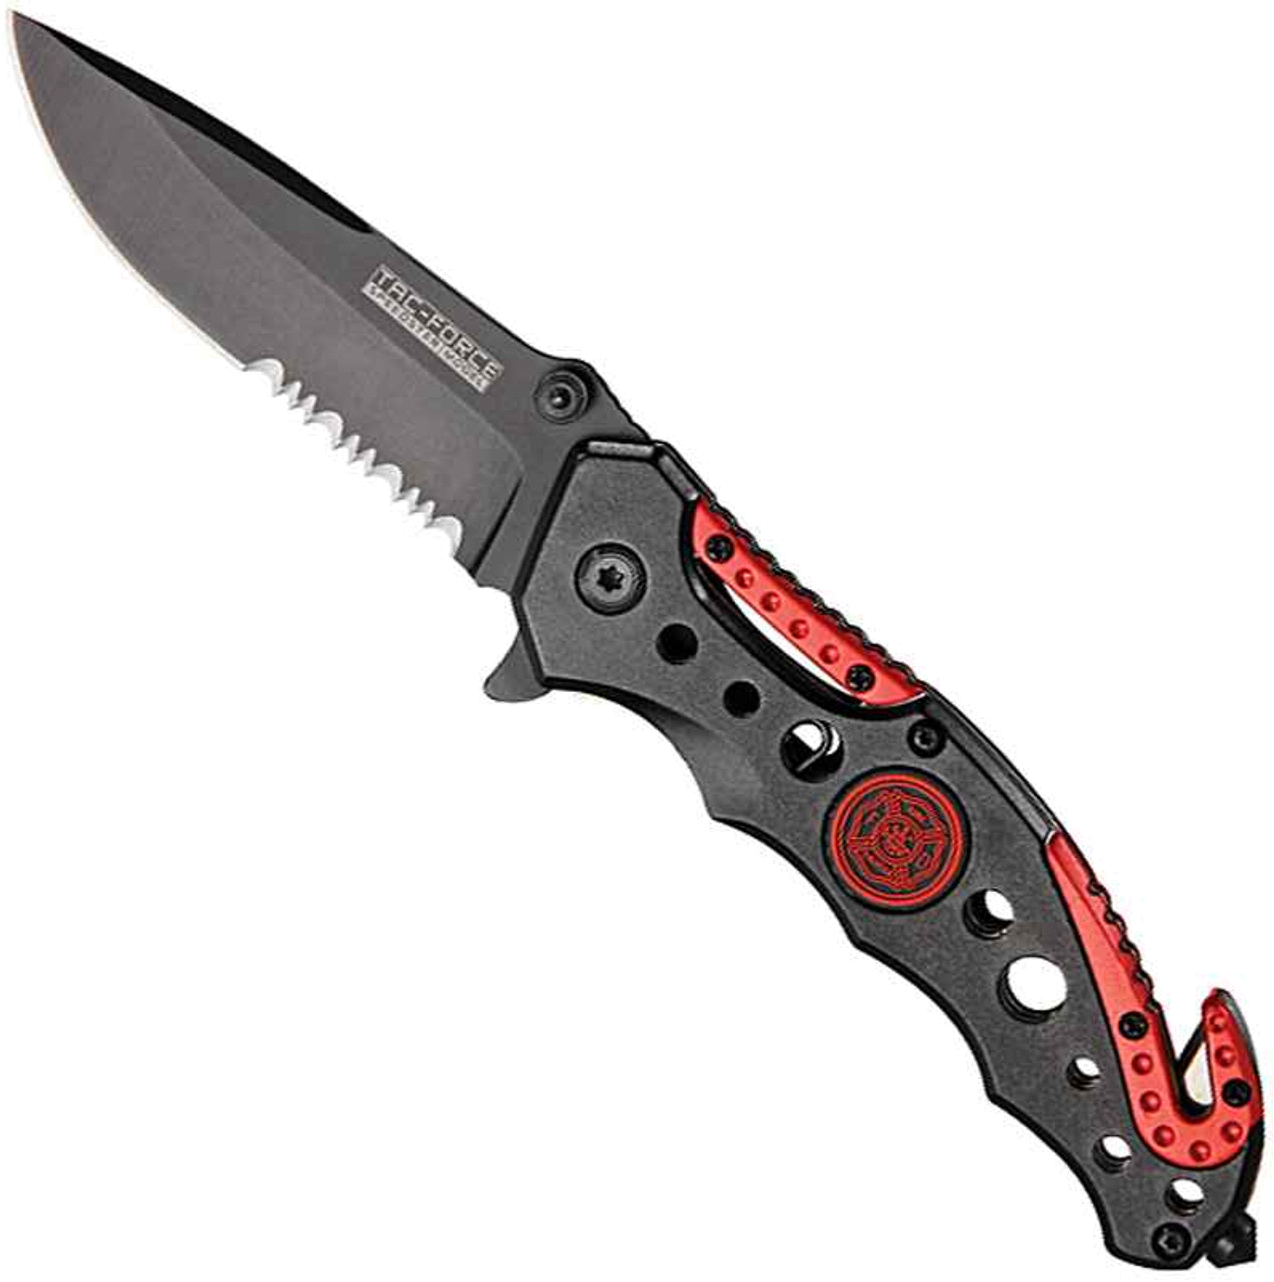 product image for Tac-Force TF-723FD Tactical Folding Knife Black Half-Serrated Blade Red Black Handle